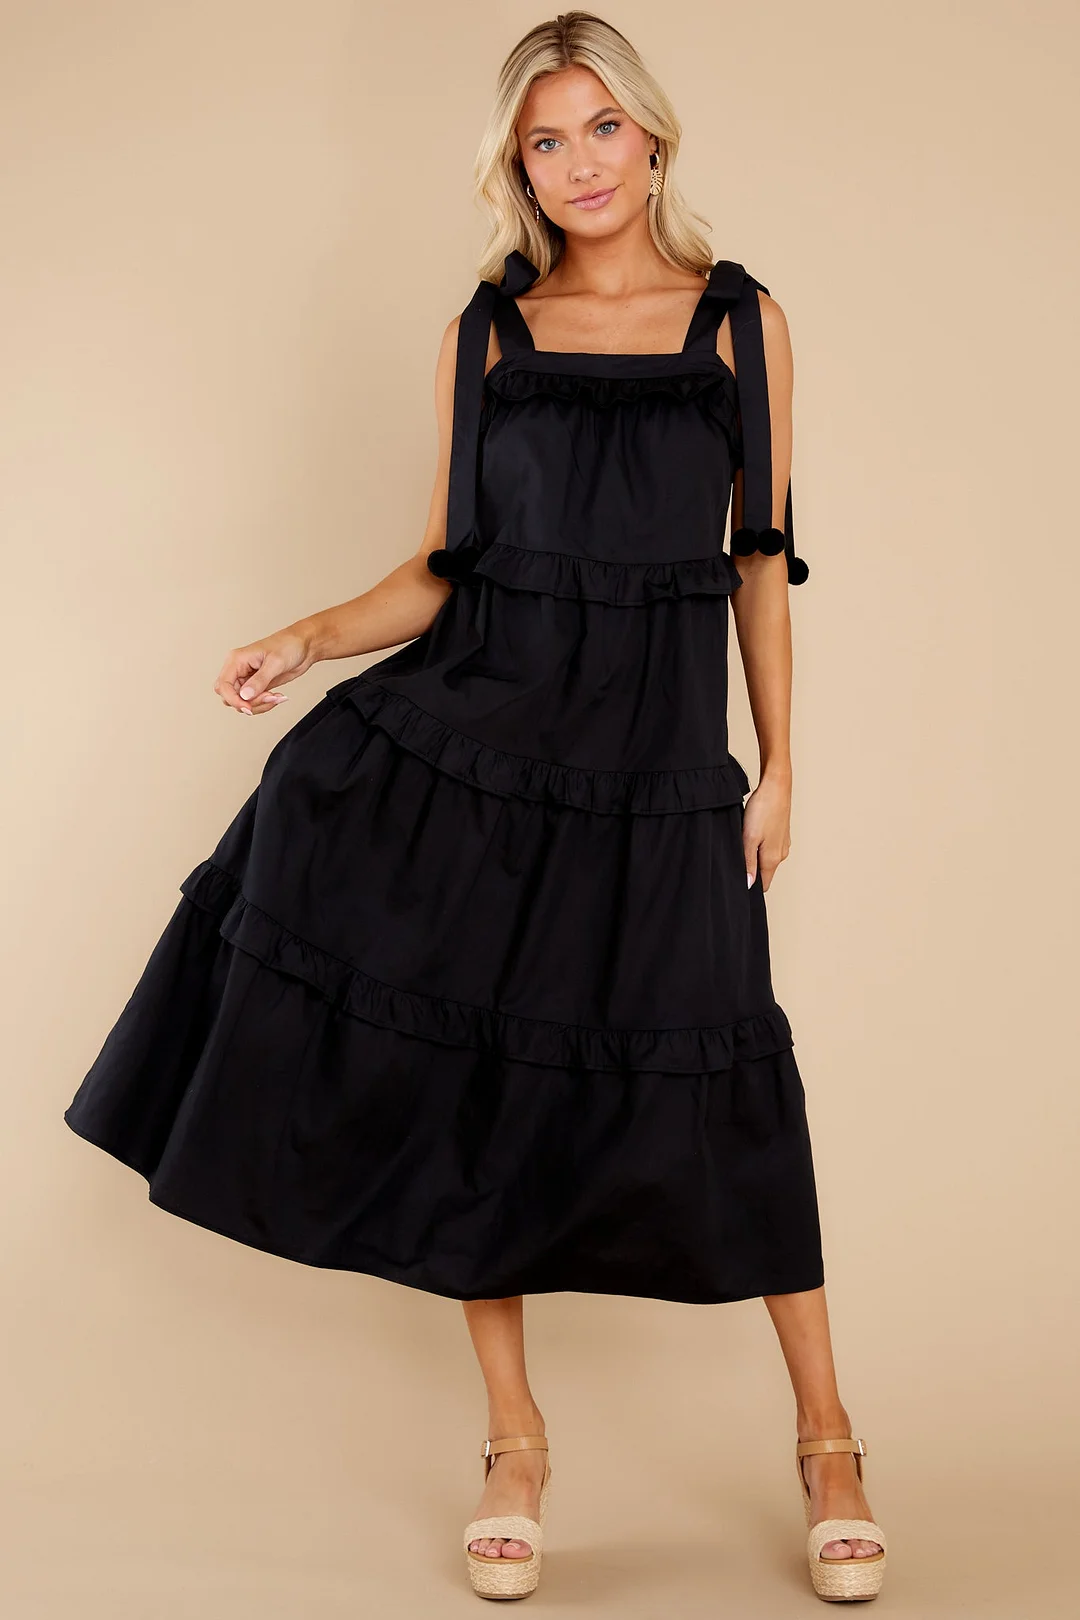 Just The Occasion Black Cotton Dress